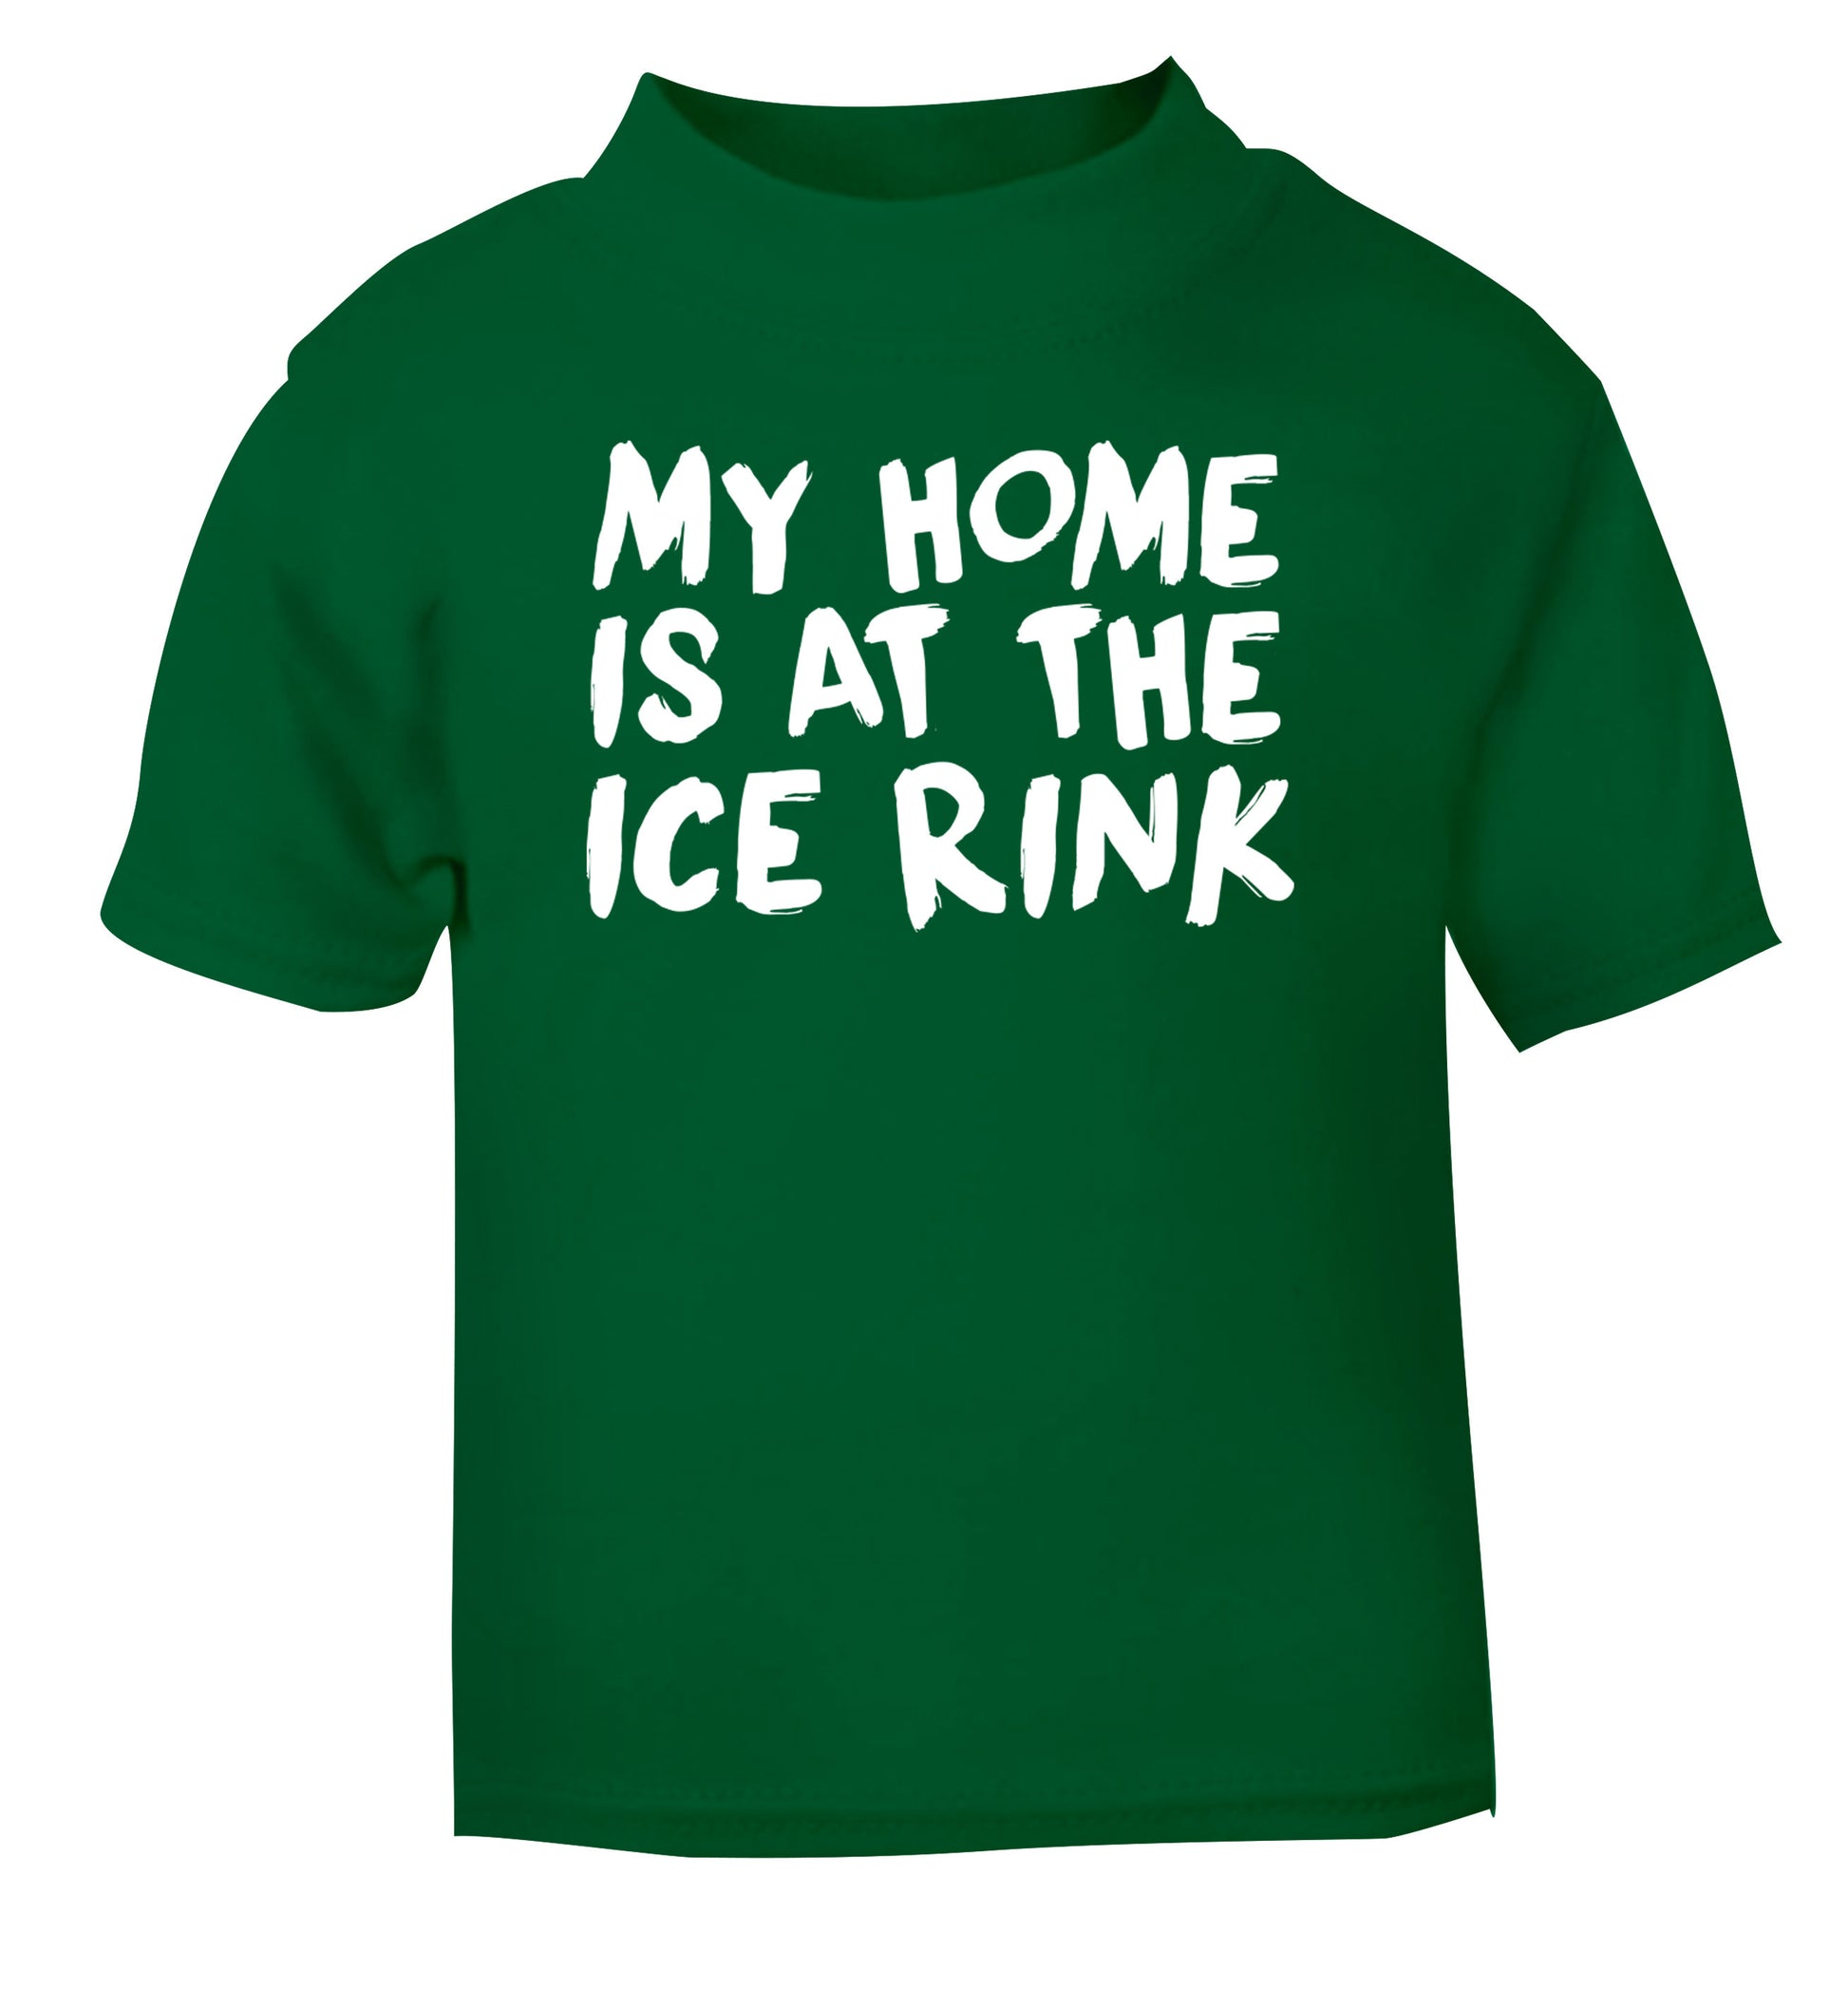 My home is at the ice rink green Baby Toddler Tshirt 2 Years